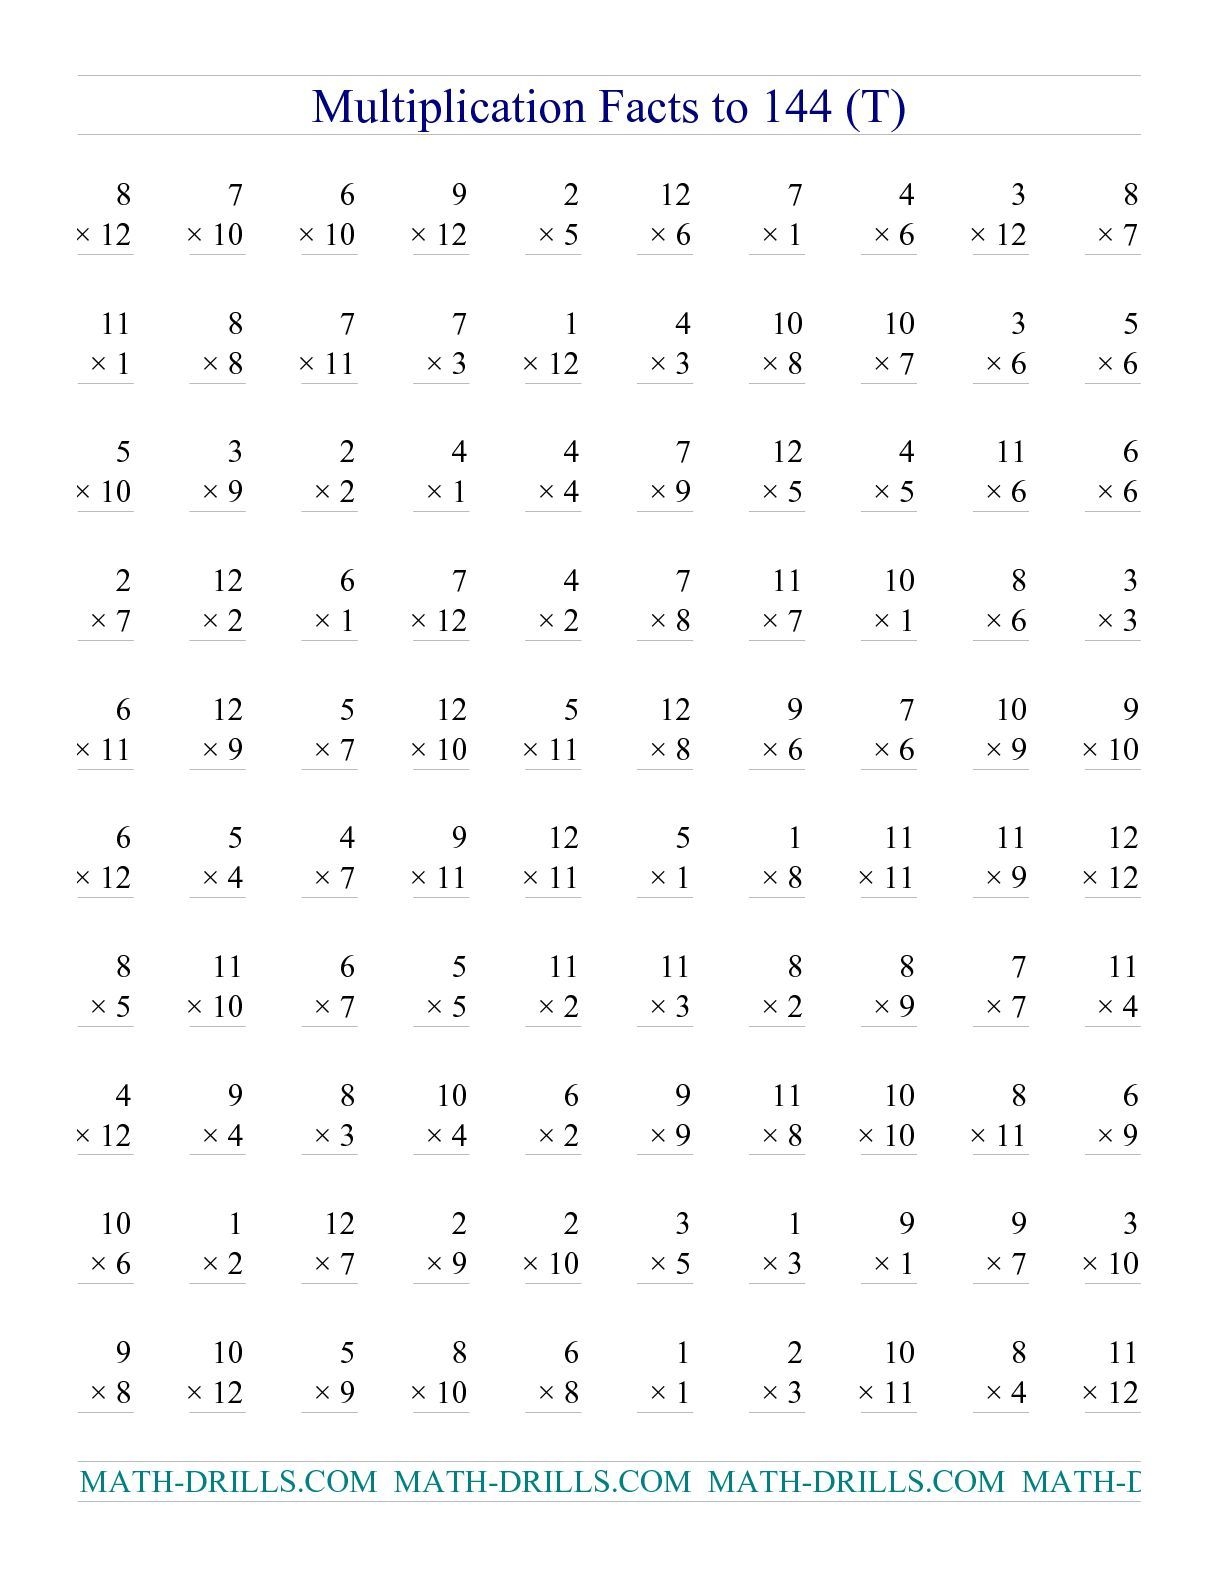 The Facts To 144 no Zeros T Math Worksheet From The Multiplic Printable Multiplication Worksheets Multiplication Worksheets Multiplication Facts Worksheets